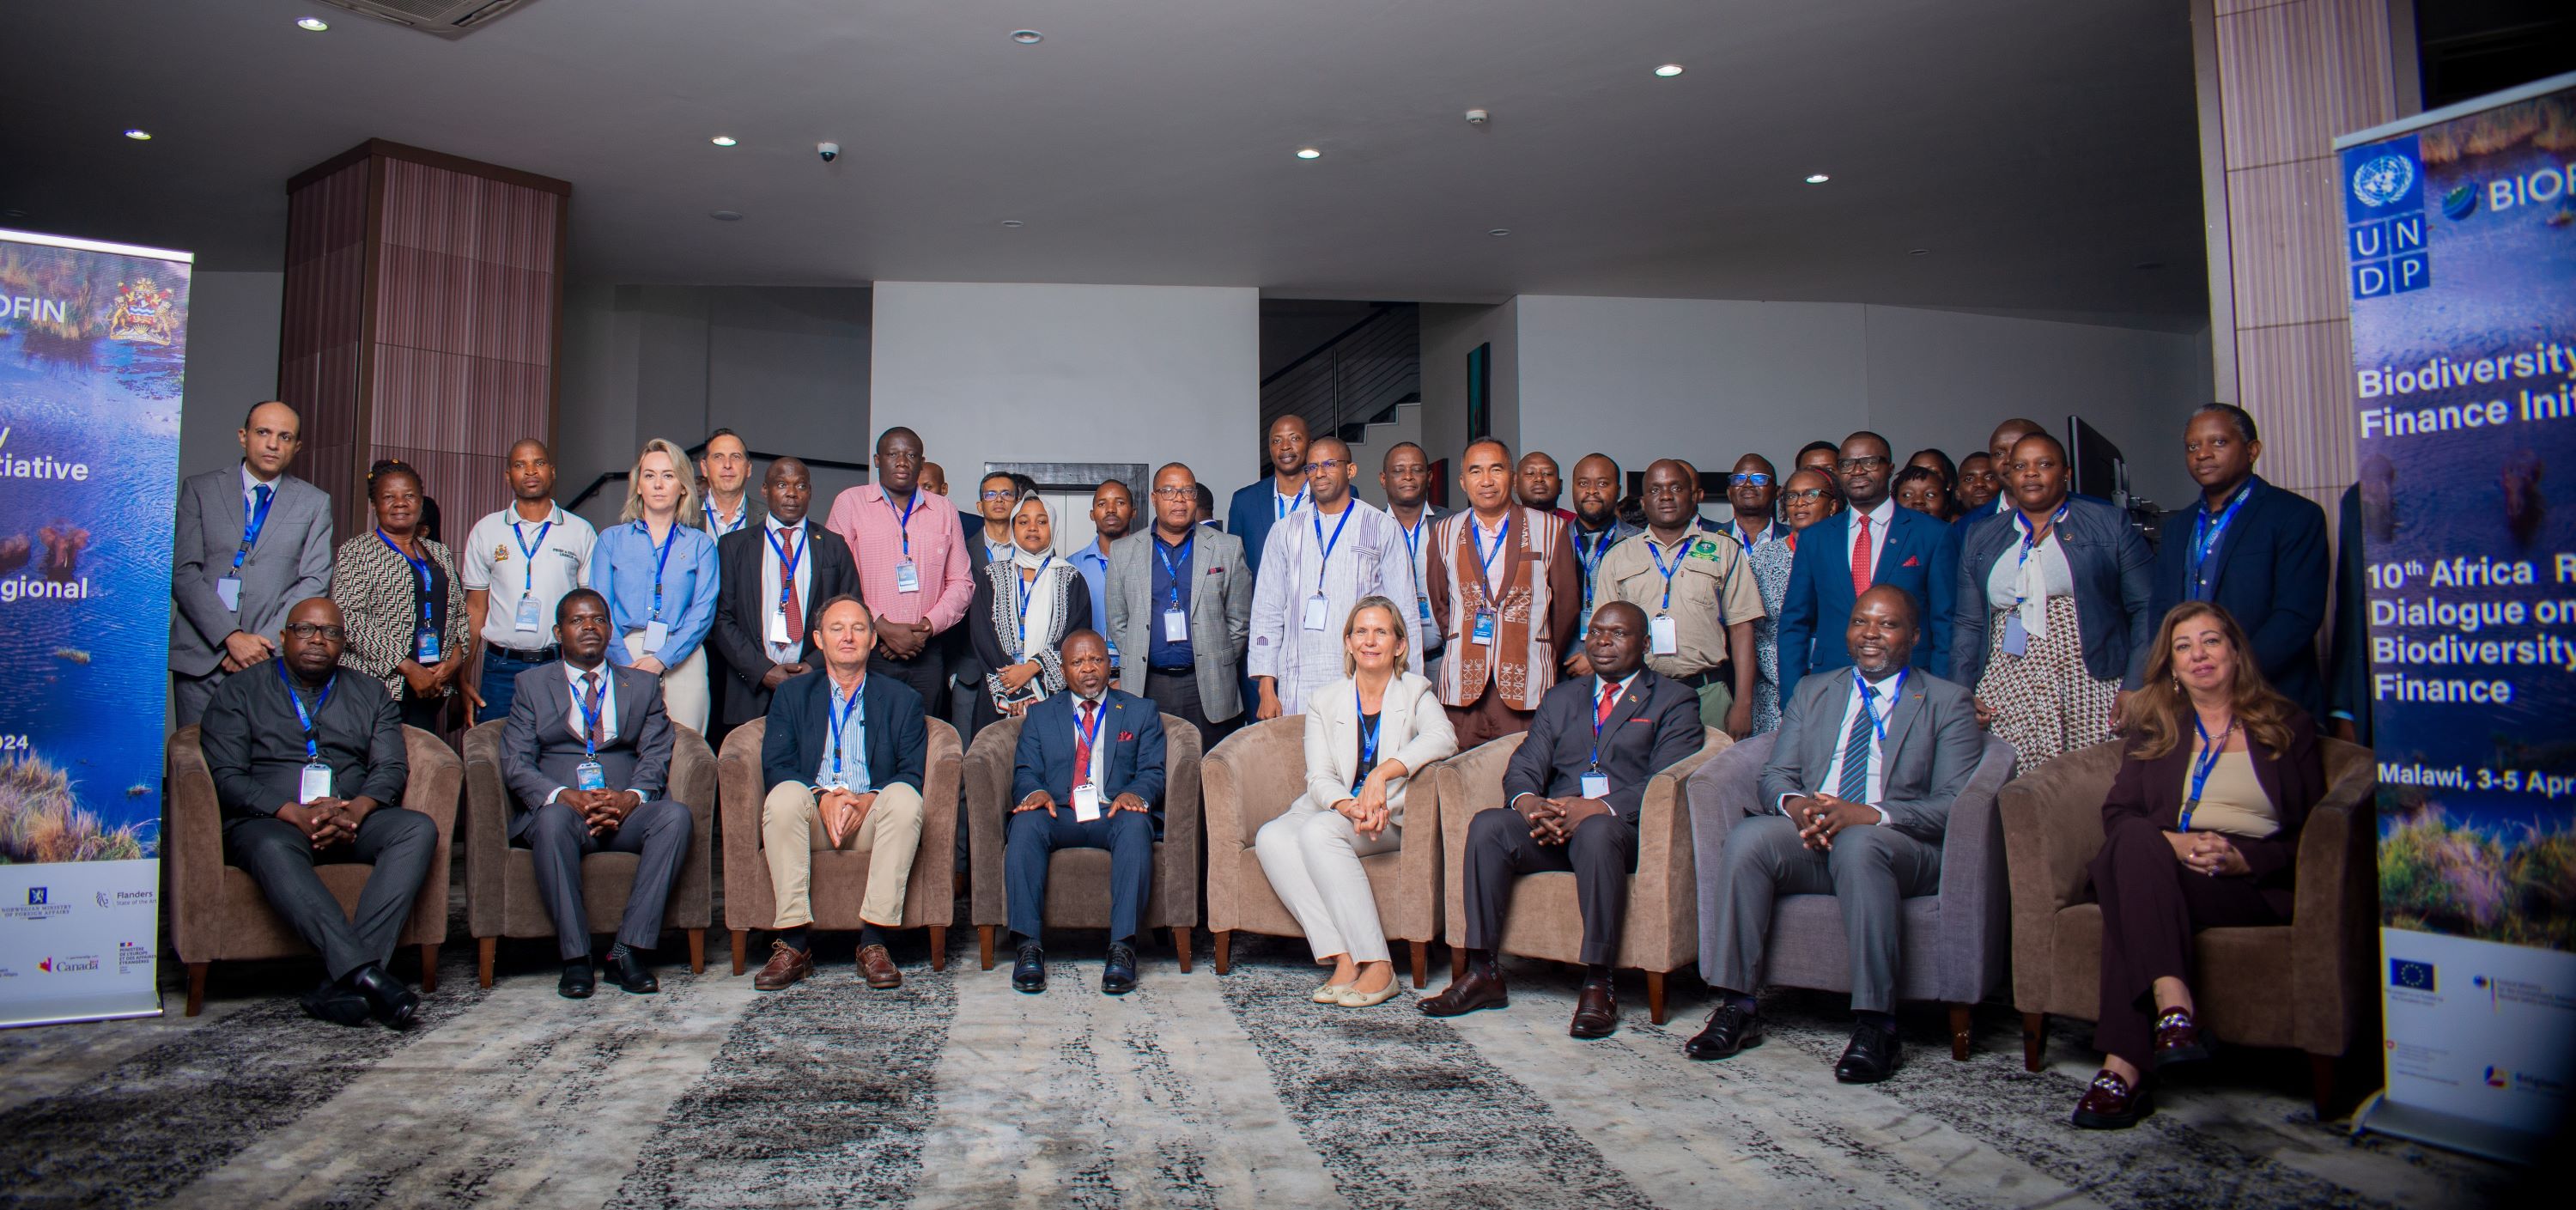 Participants to the 10th Africa Regional Dialogue on Biodiversity Finance, 3-5 April 2024